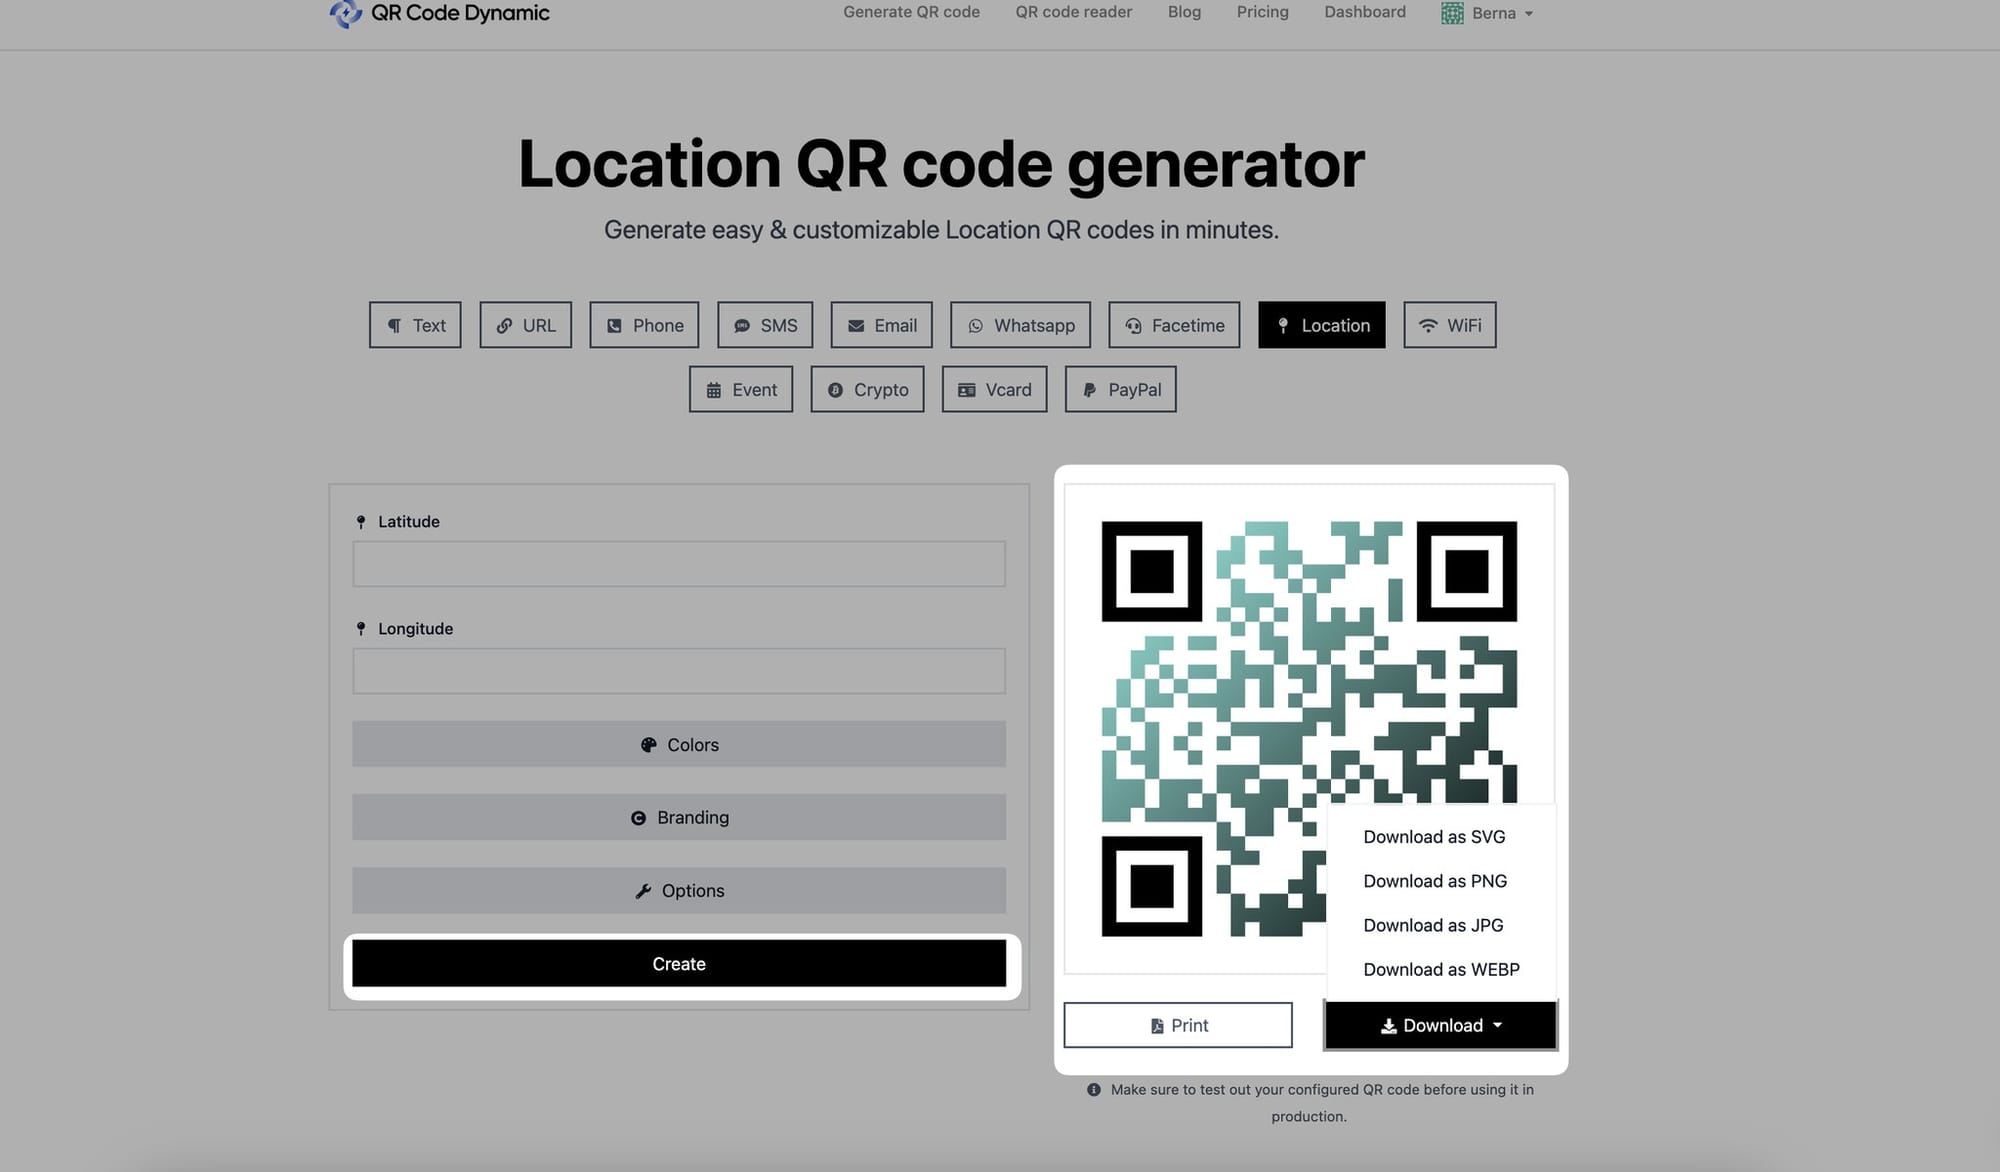 creating and downloading location qr code